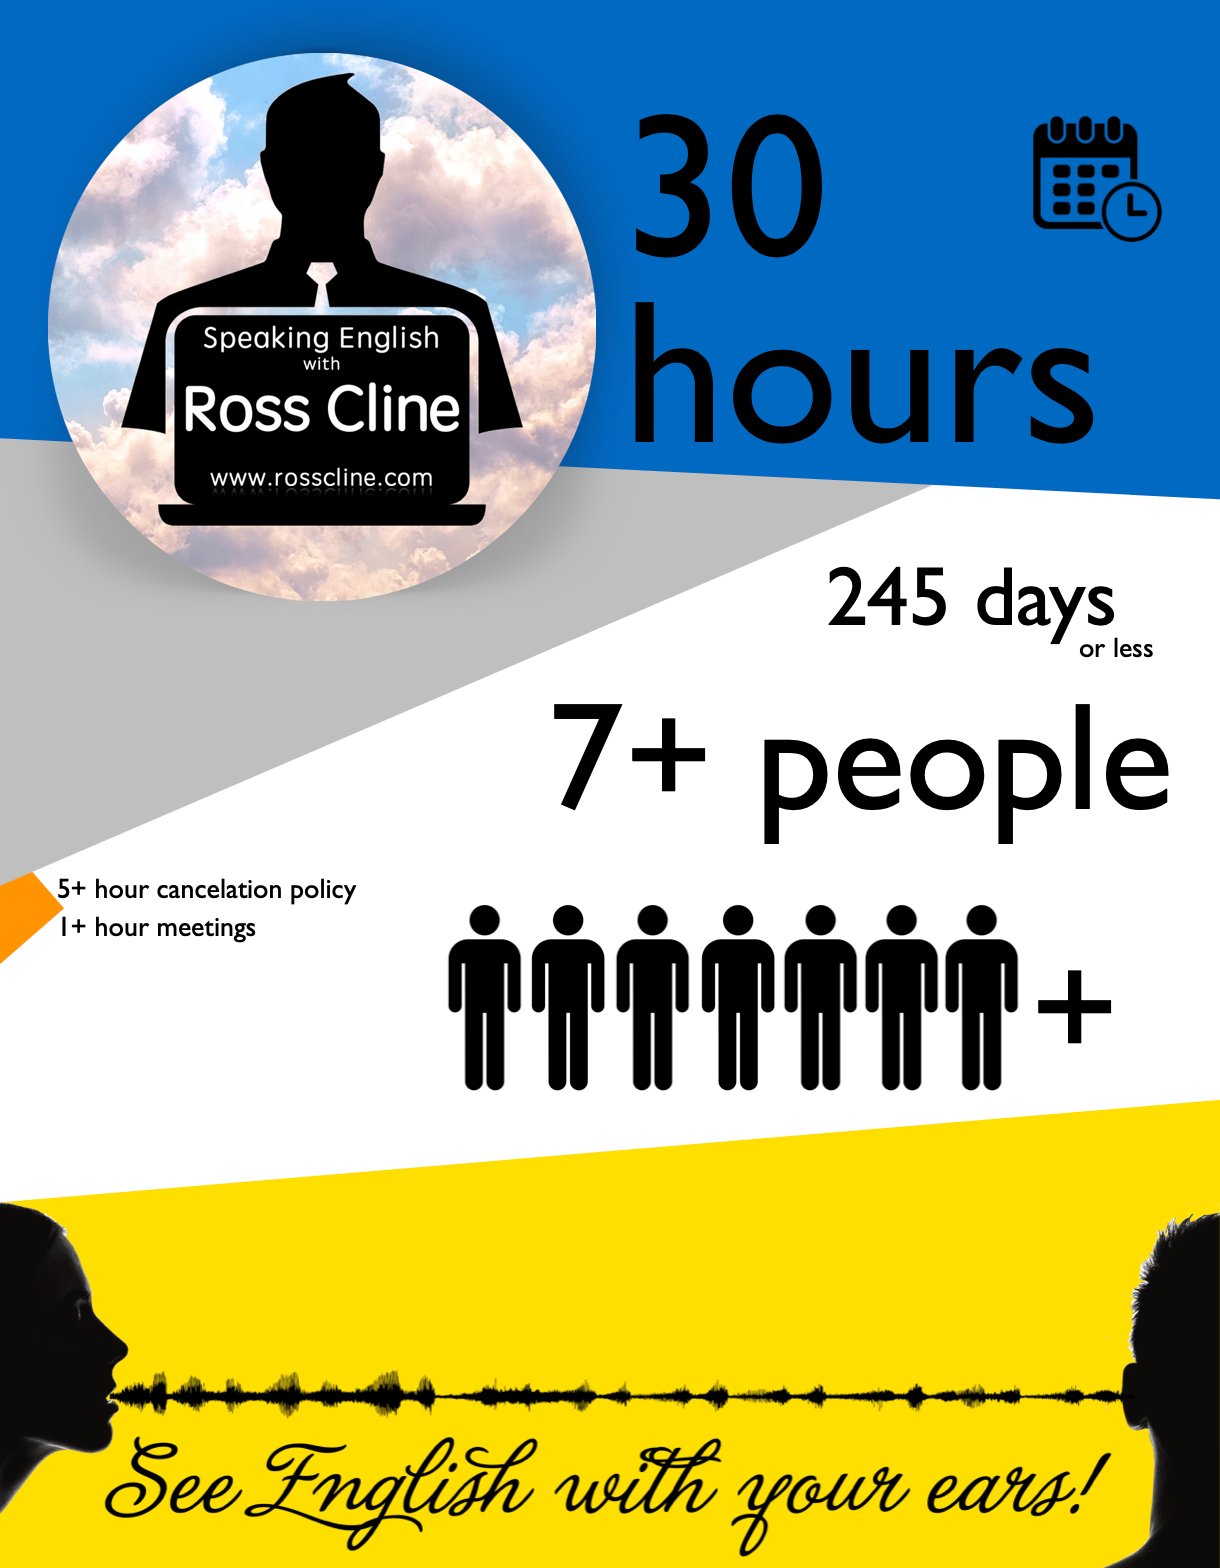 A.) 30 hours of Online Time for 7+ people - www.rosscline.com